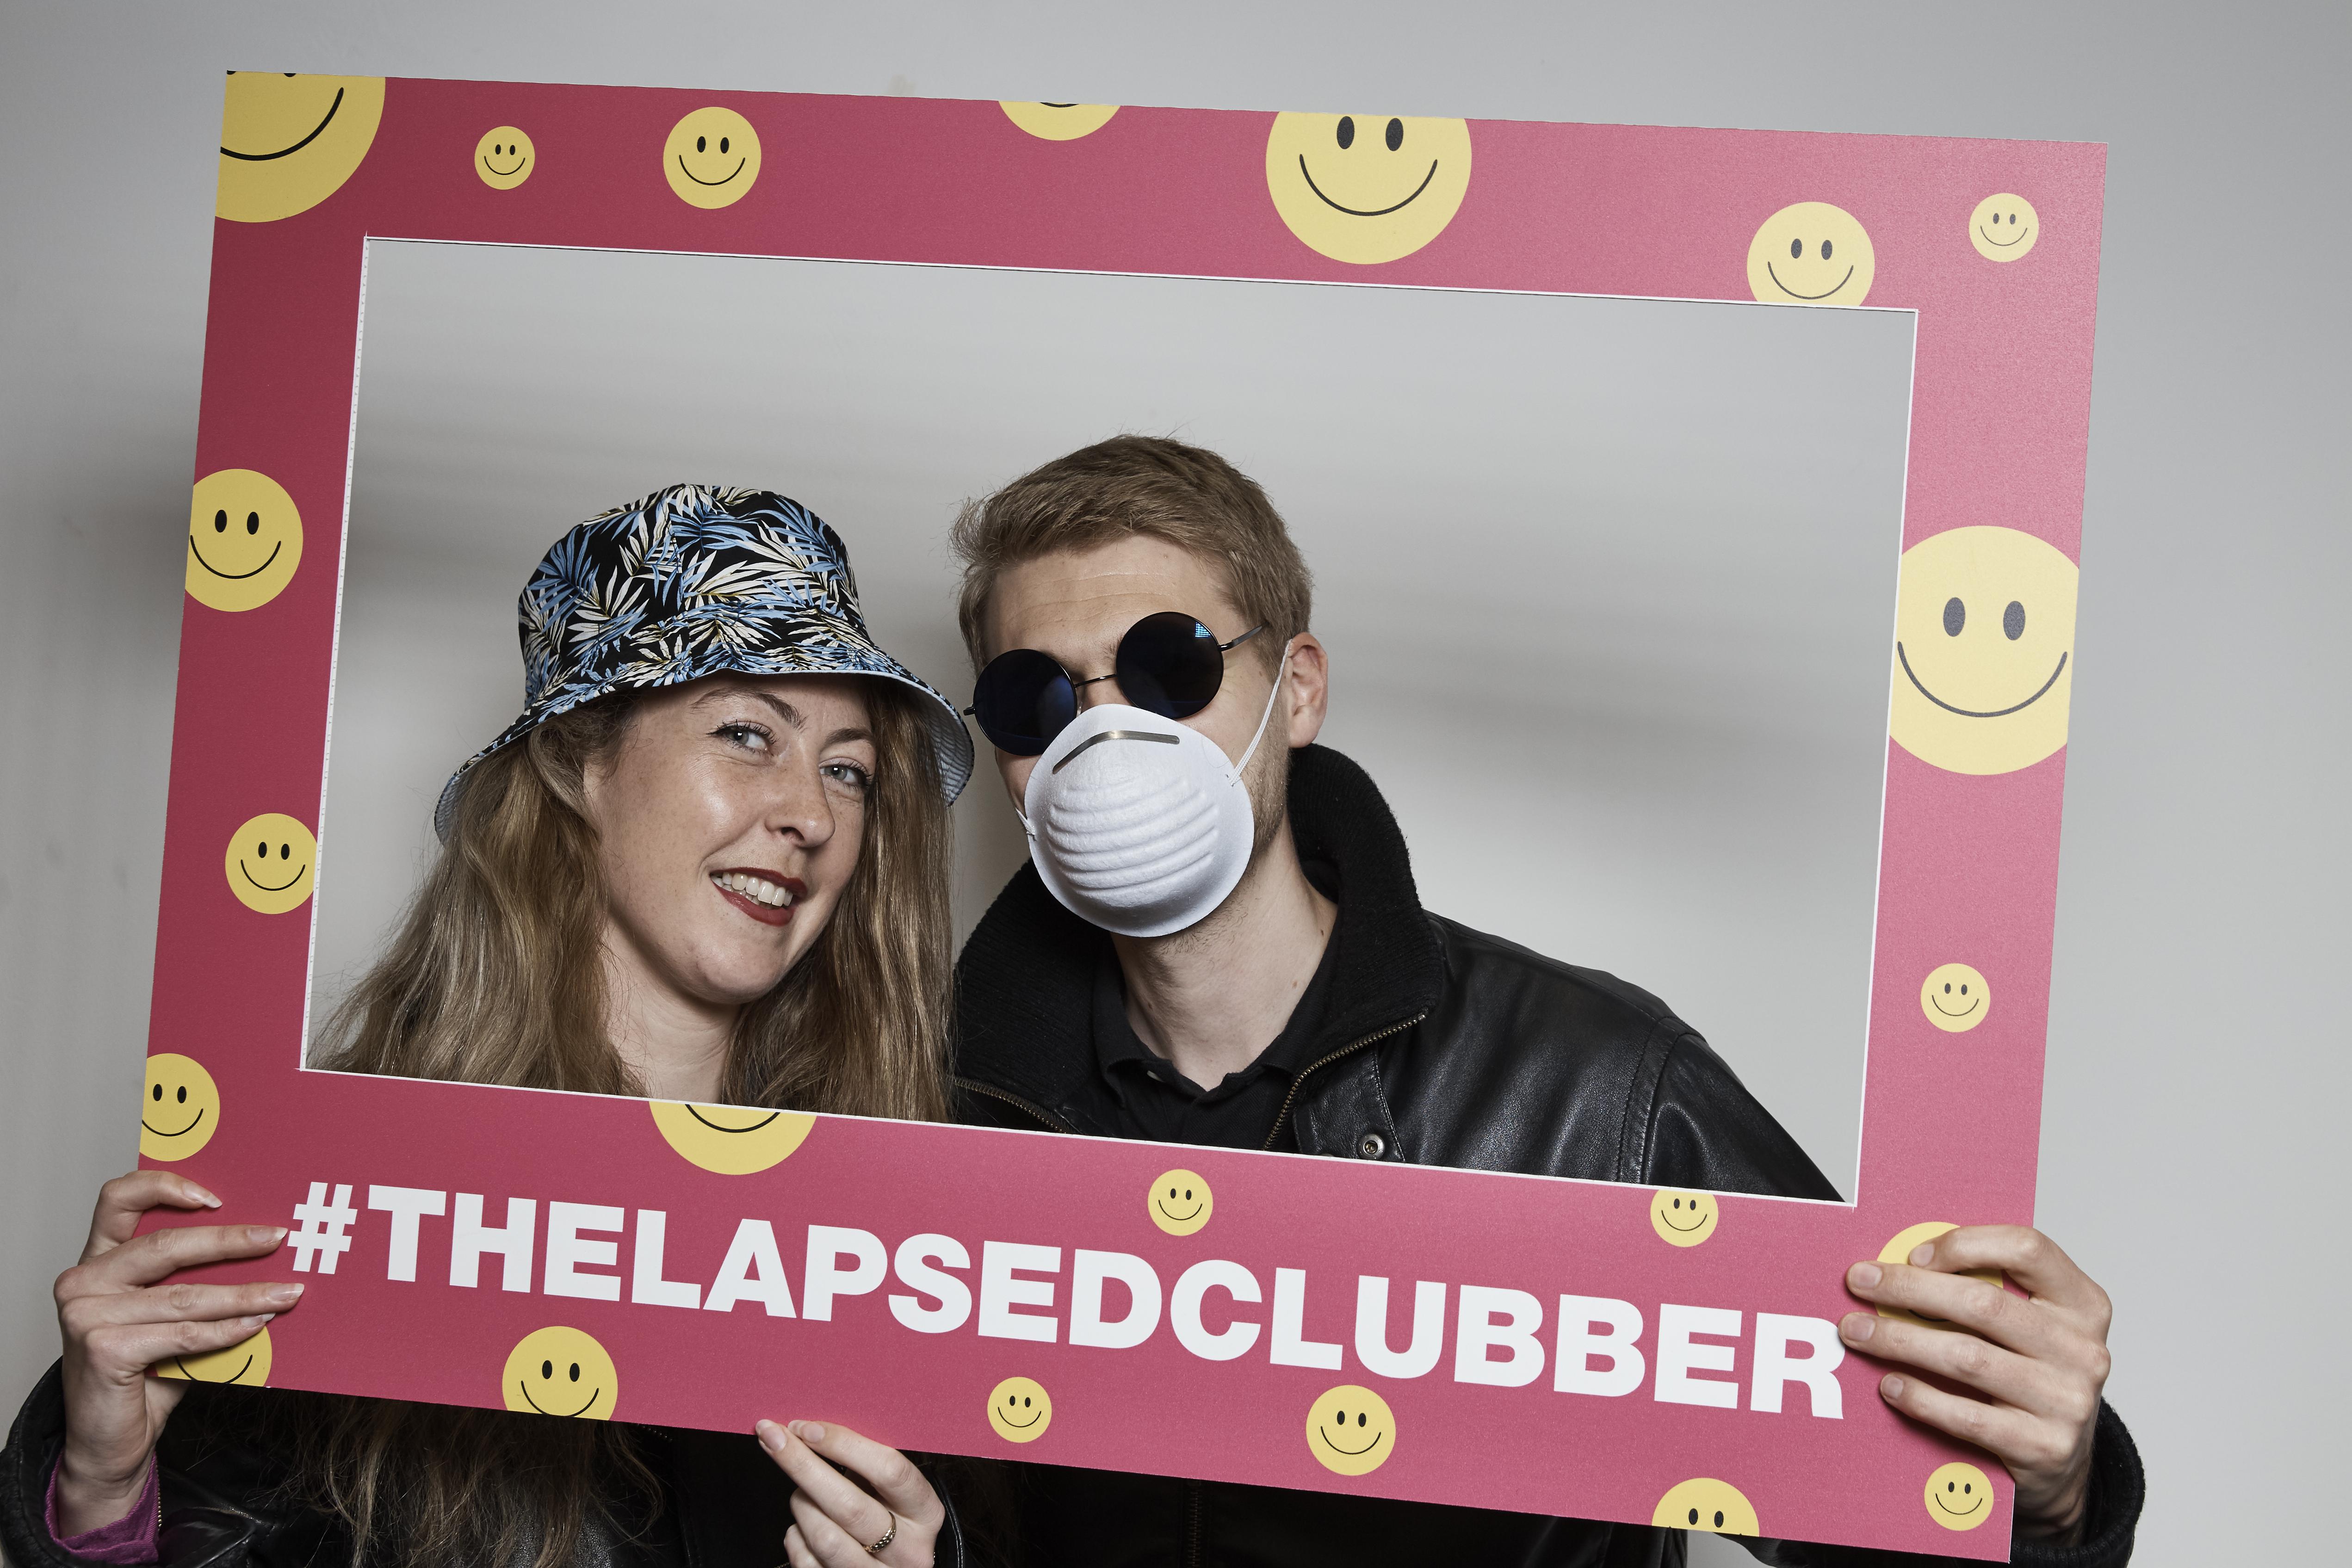 The Lapsed Clubber project